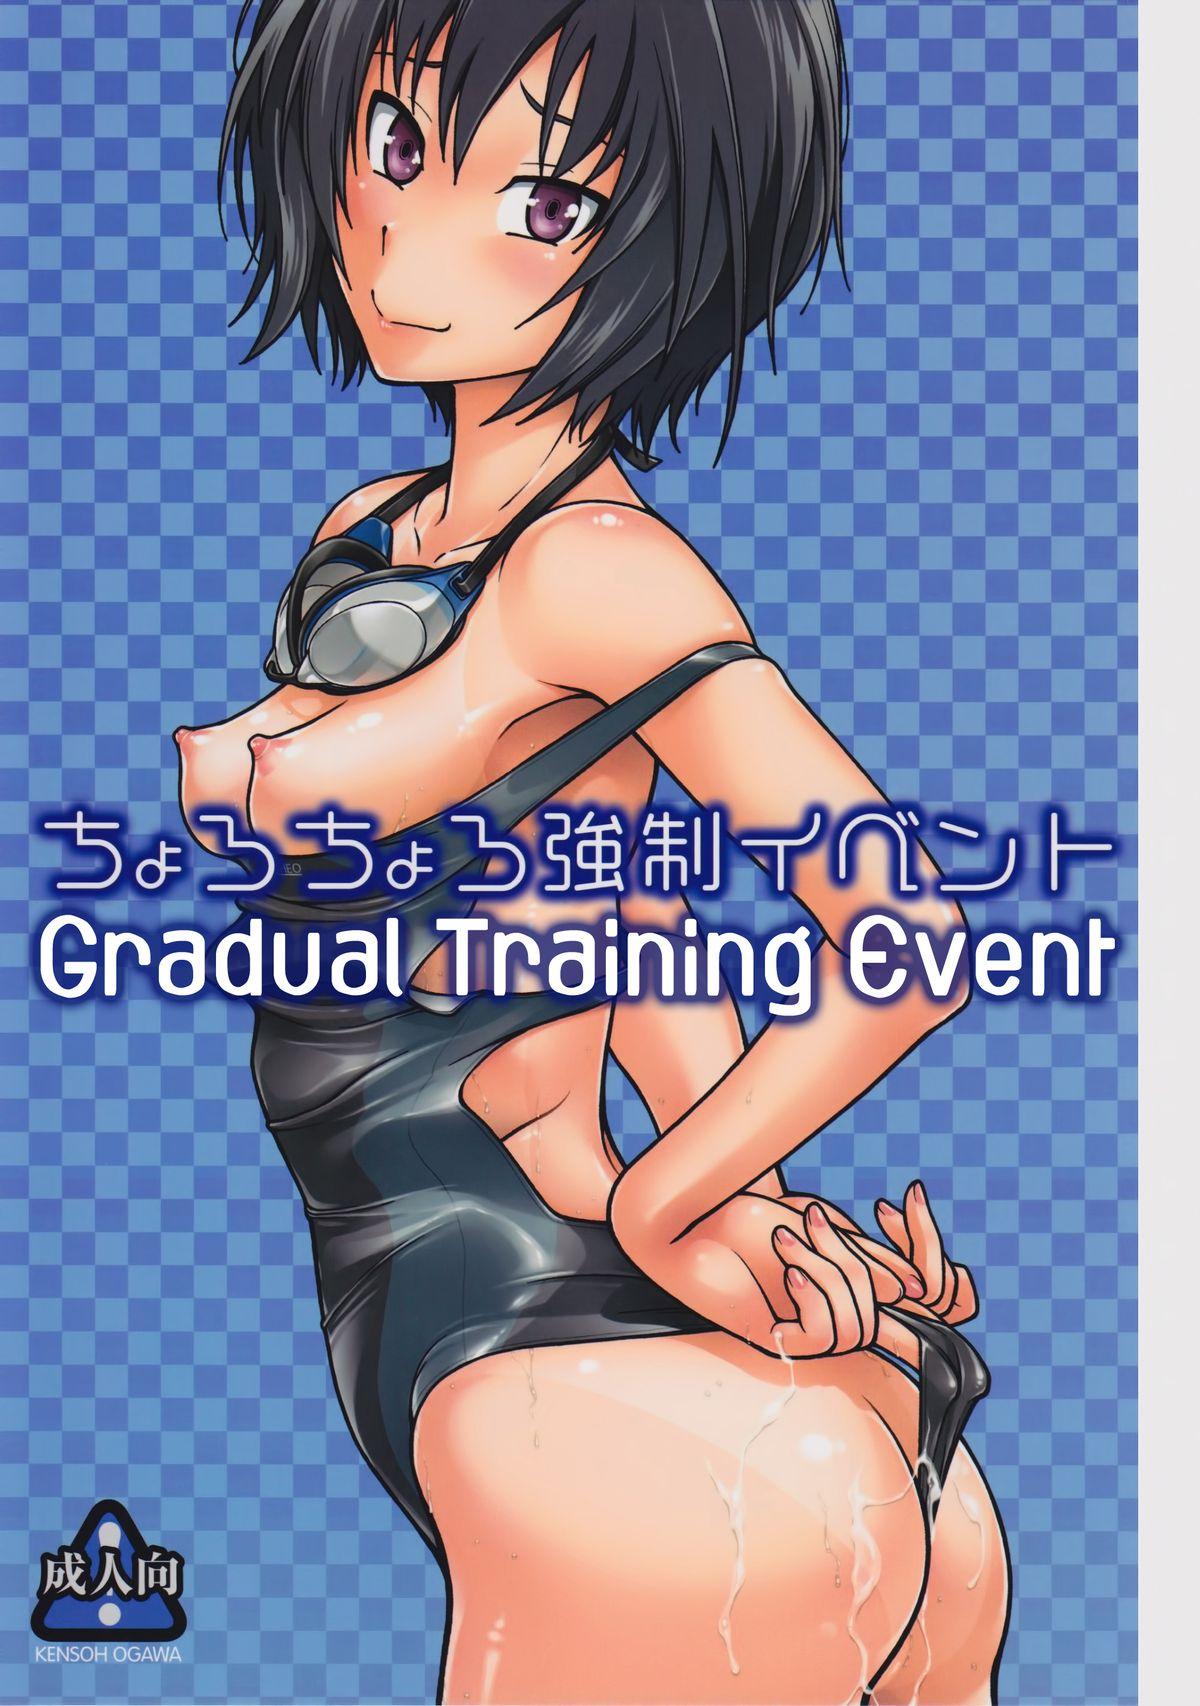 Hotporn Chorochoro Kyousei Event - Amagami Panties - Picture 1